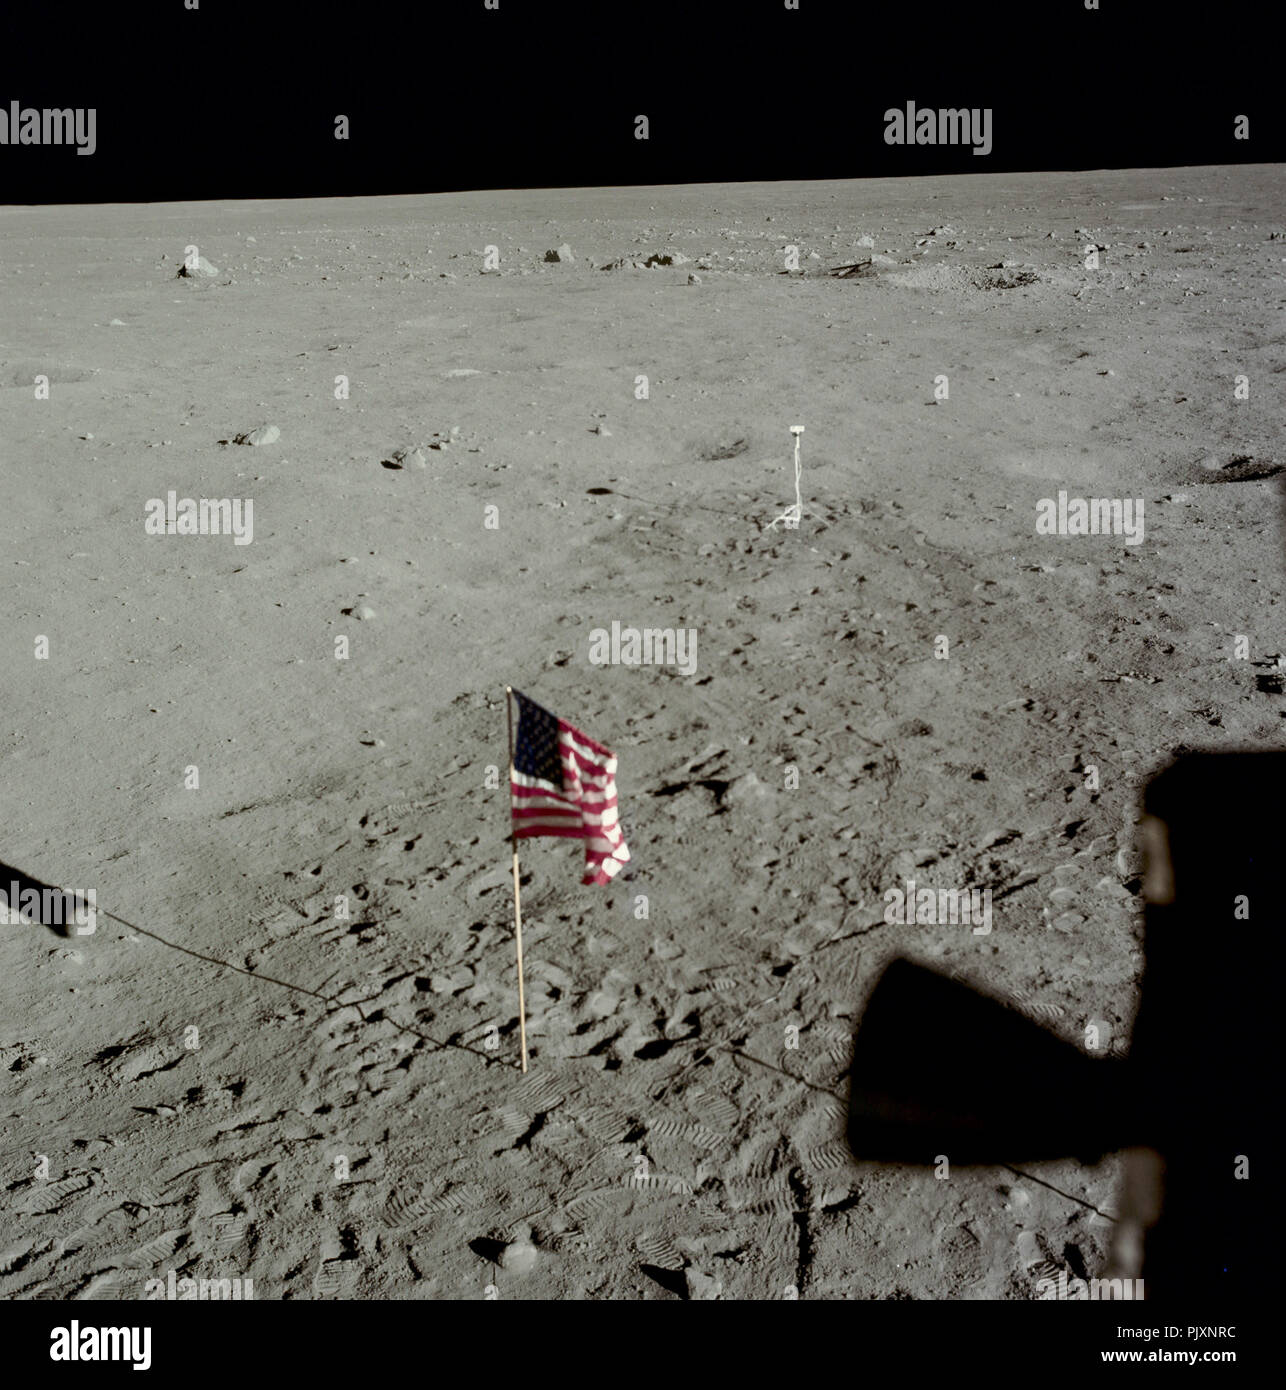 The Moon - (FILE) -- View of lunar surface after Extra Vehicular Activity (EVA) completion on Monday, July 21,1969 with the United States flag and TV camera. Note the difference between the darker, heavily disturbed soil around the camera, and the undisturbed light soil where Armstrong and Aldrin did not set foot. Credit: NASA via CNP /MediaPunch Stock Photo